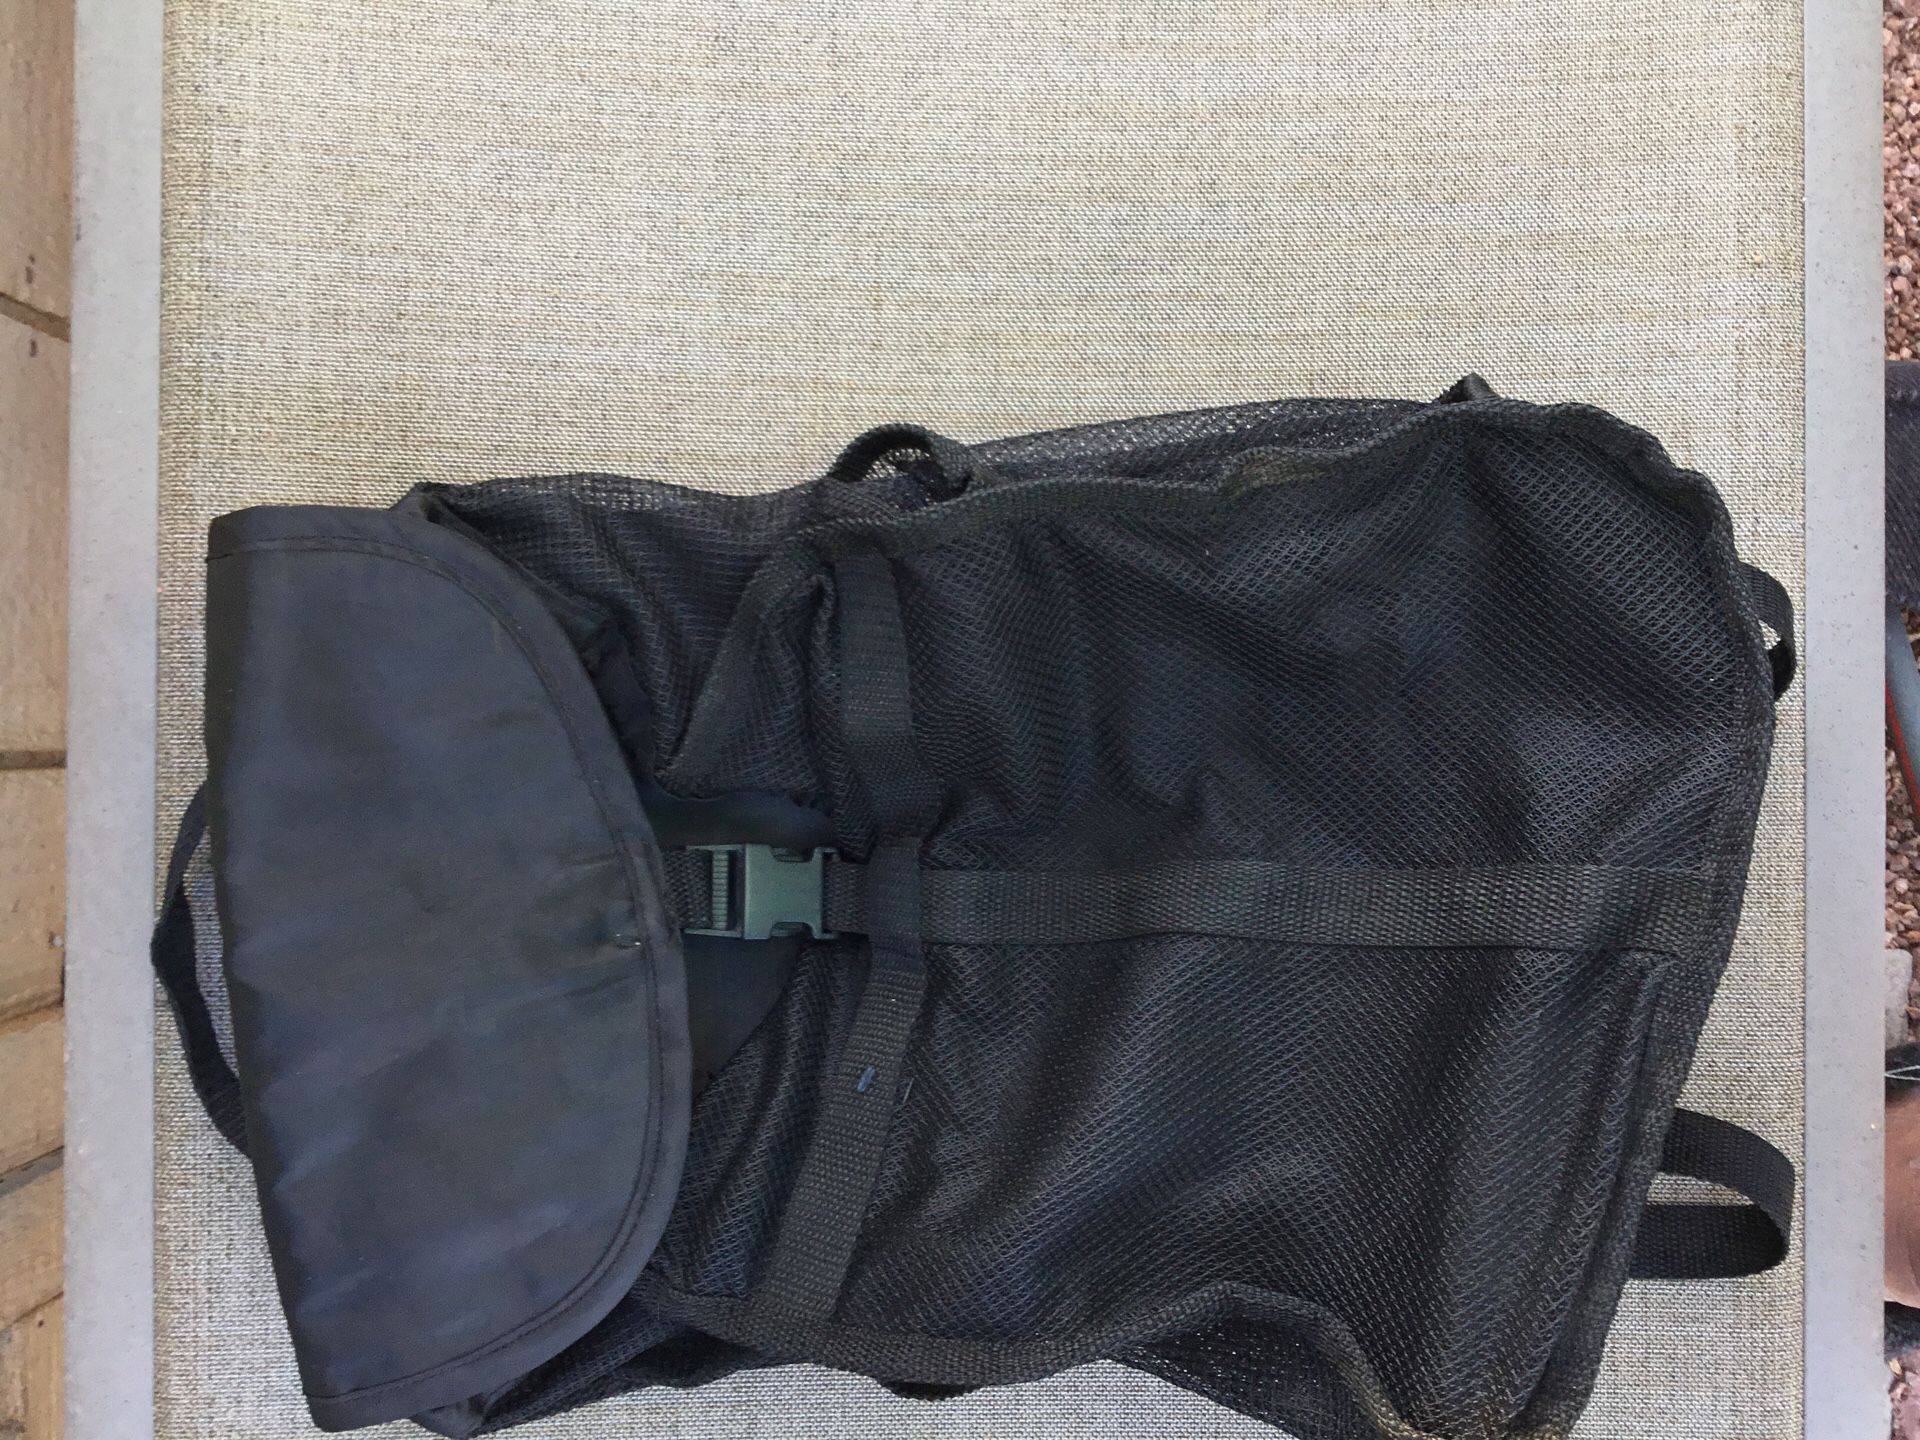 Backpack. Like new. See-through. Mesh material.